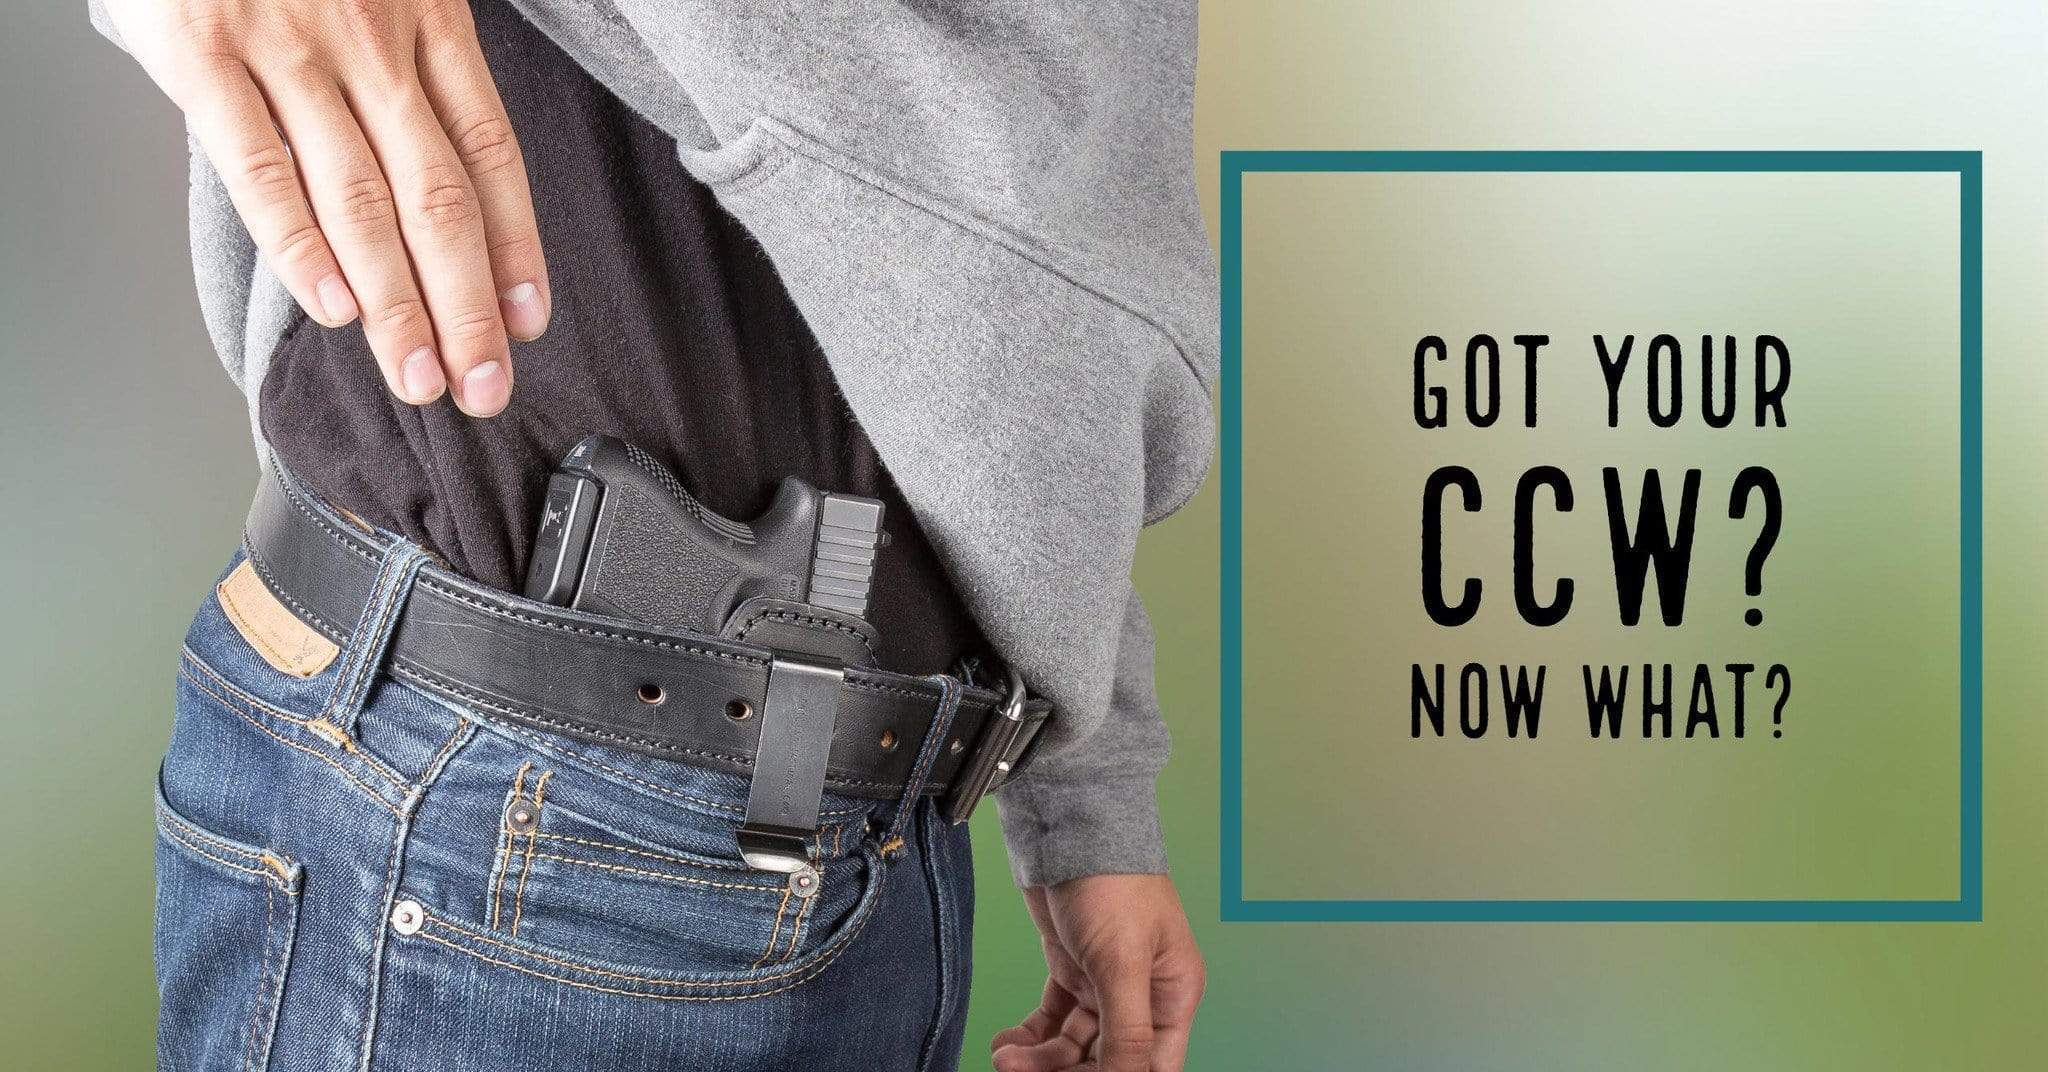 You just received your concealed carry license, now what?